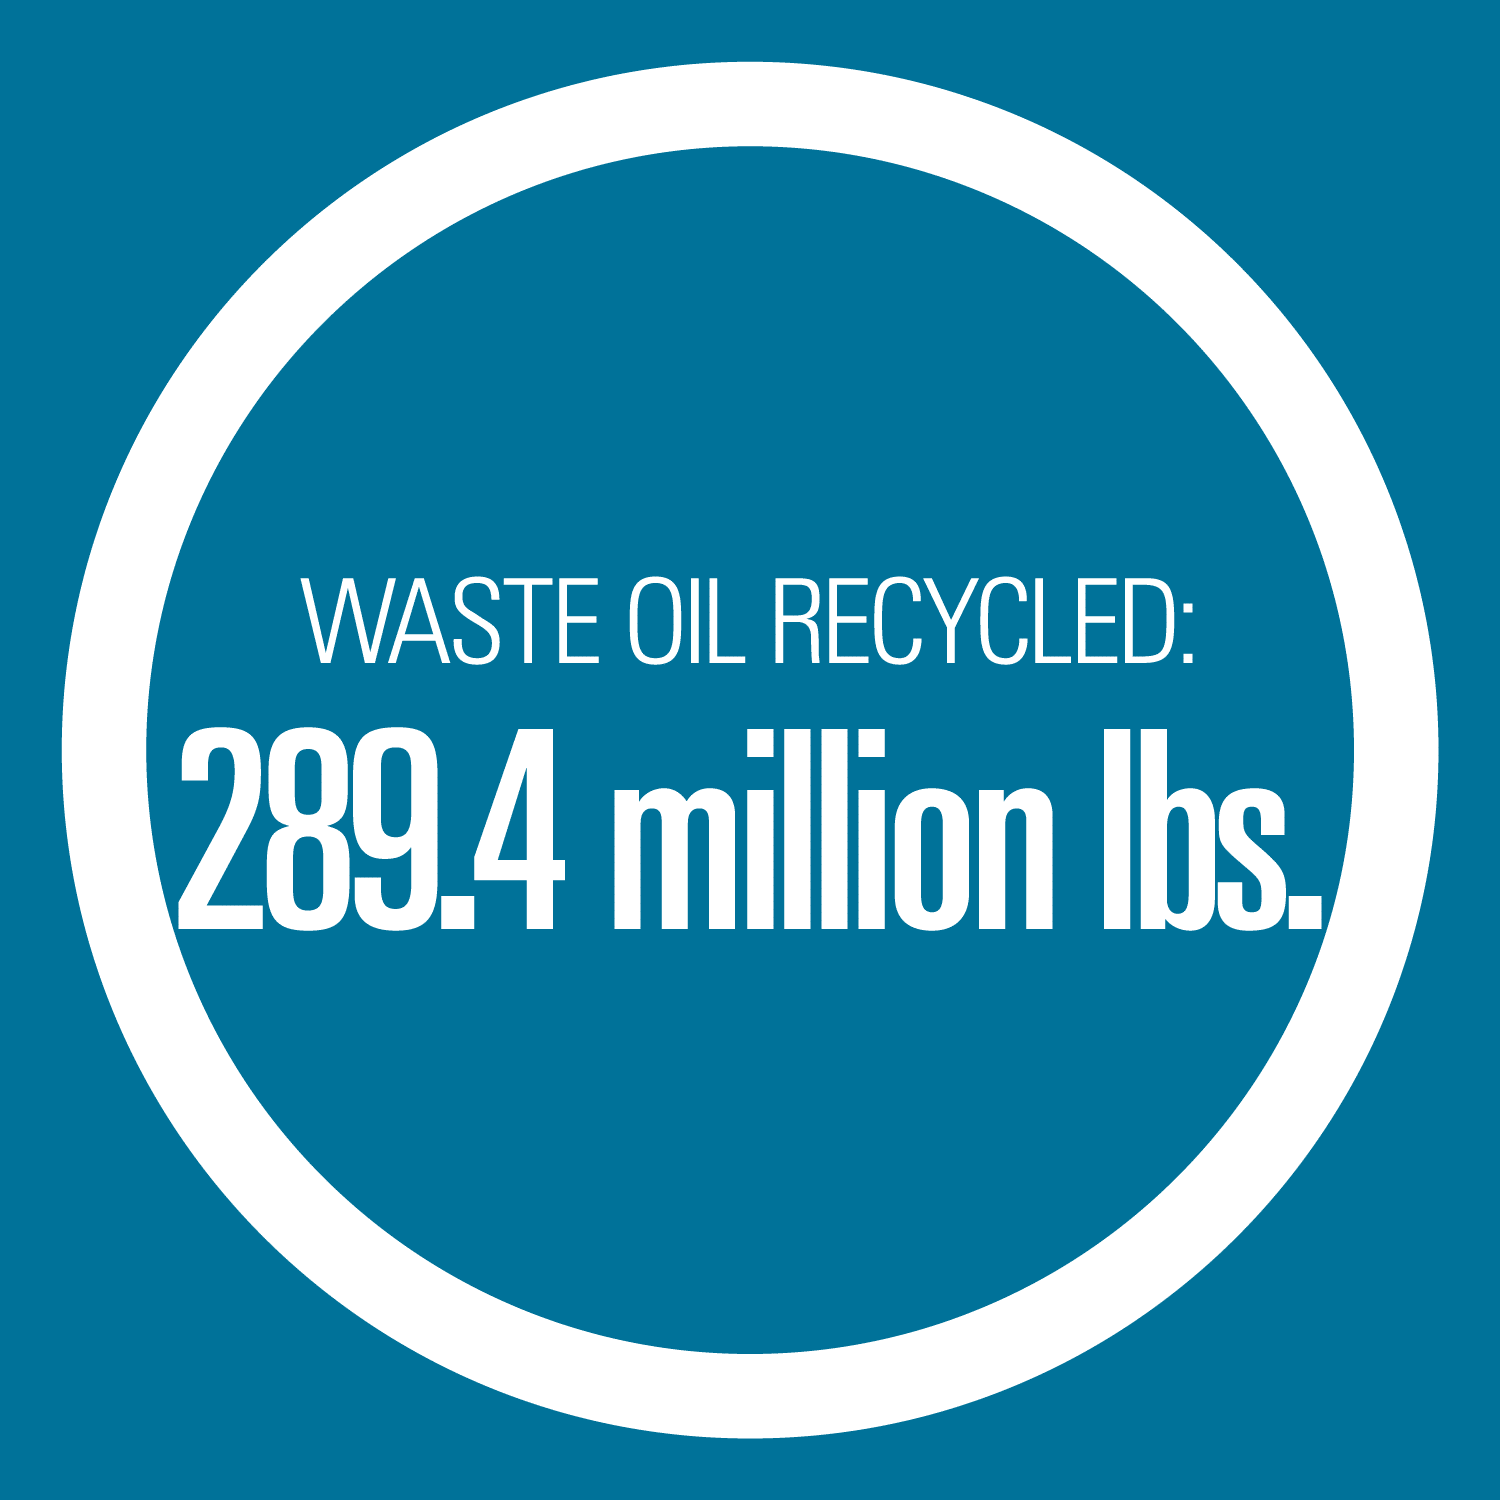 Waste Oil Recycled - 289.4 million pounds